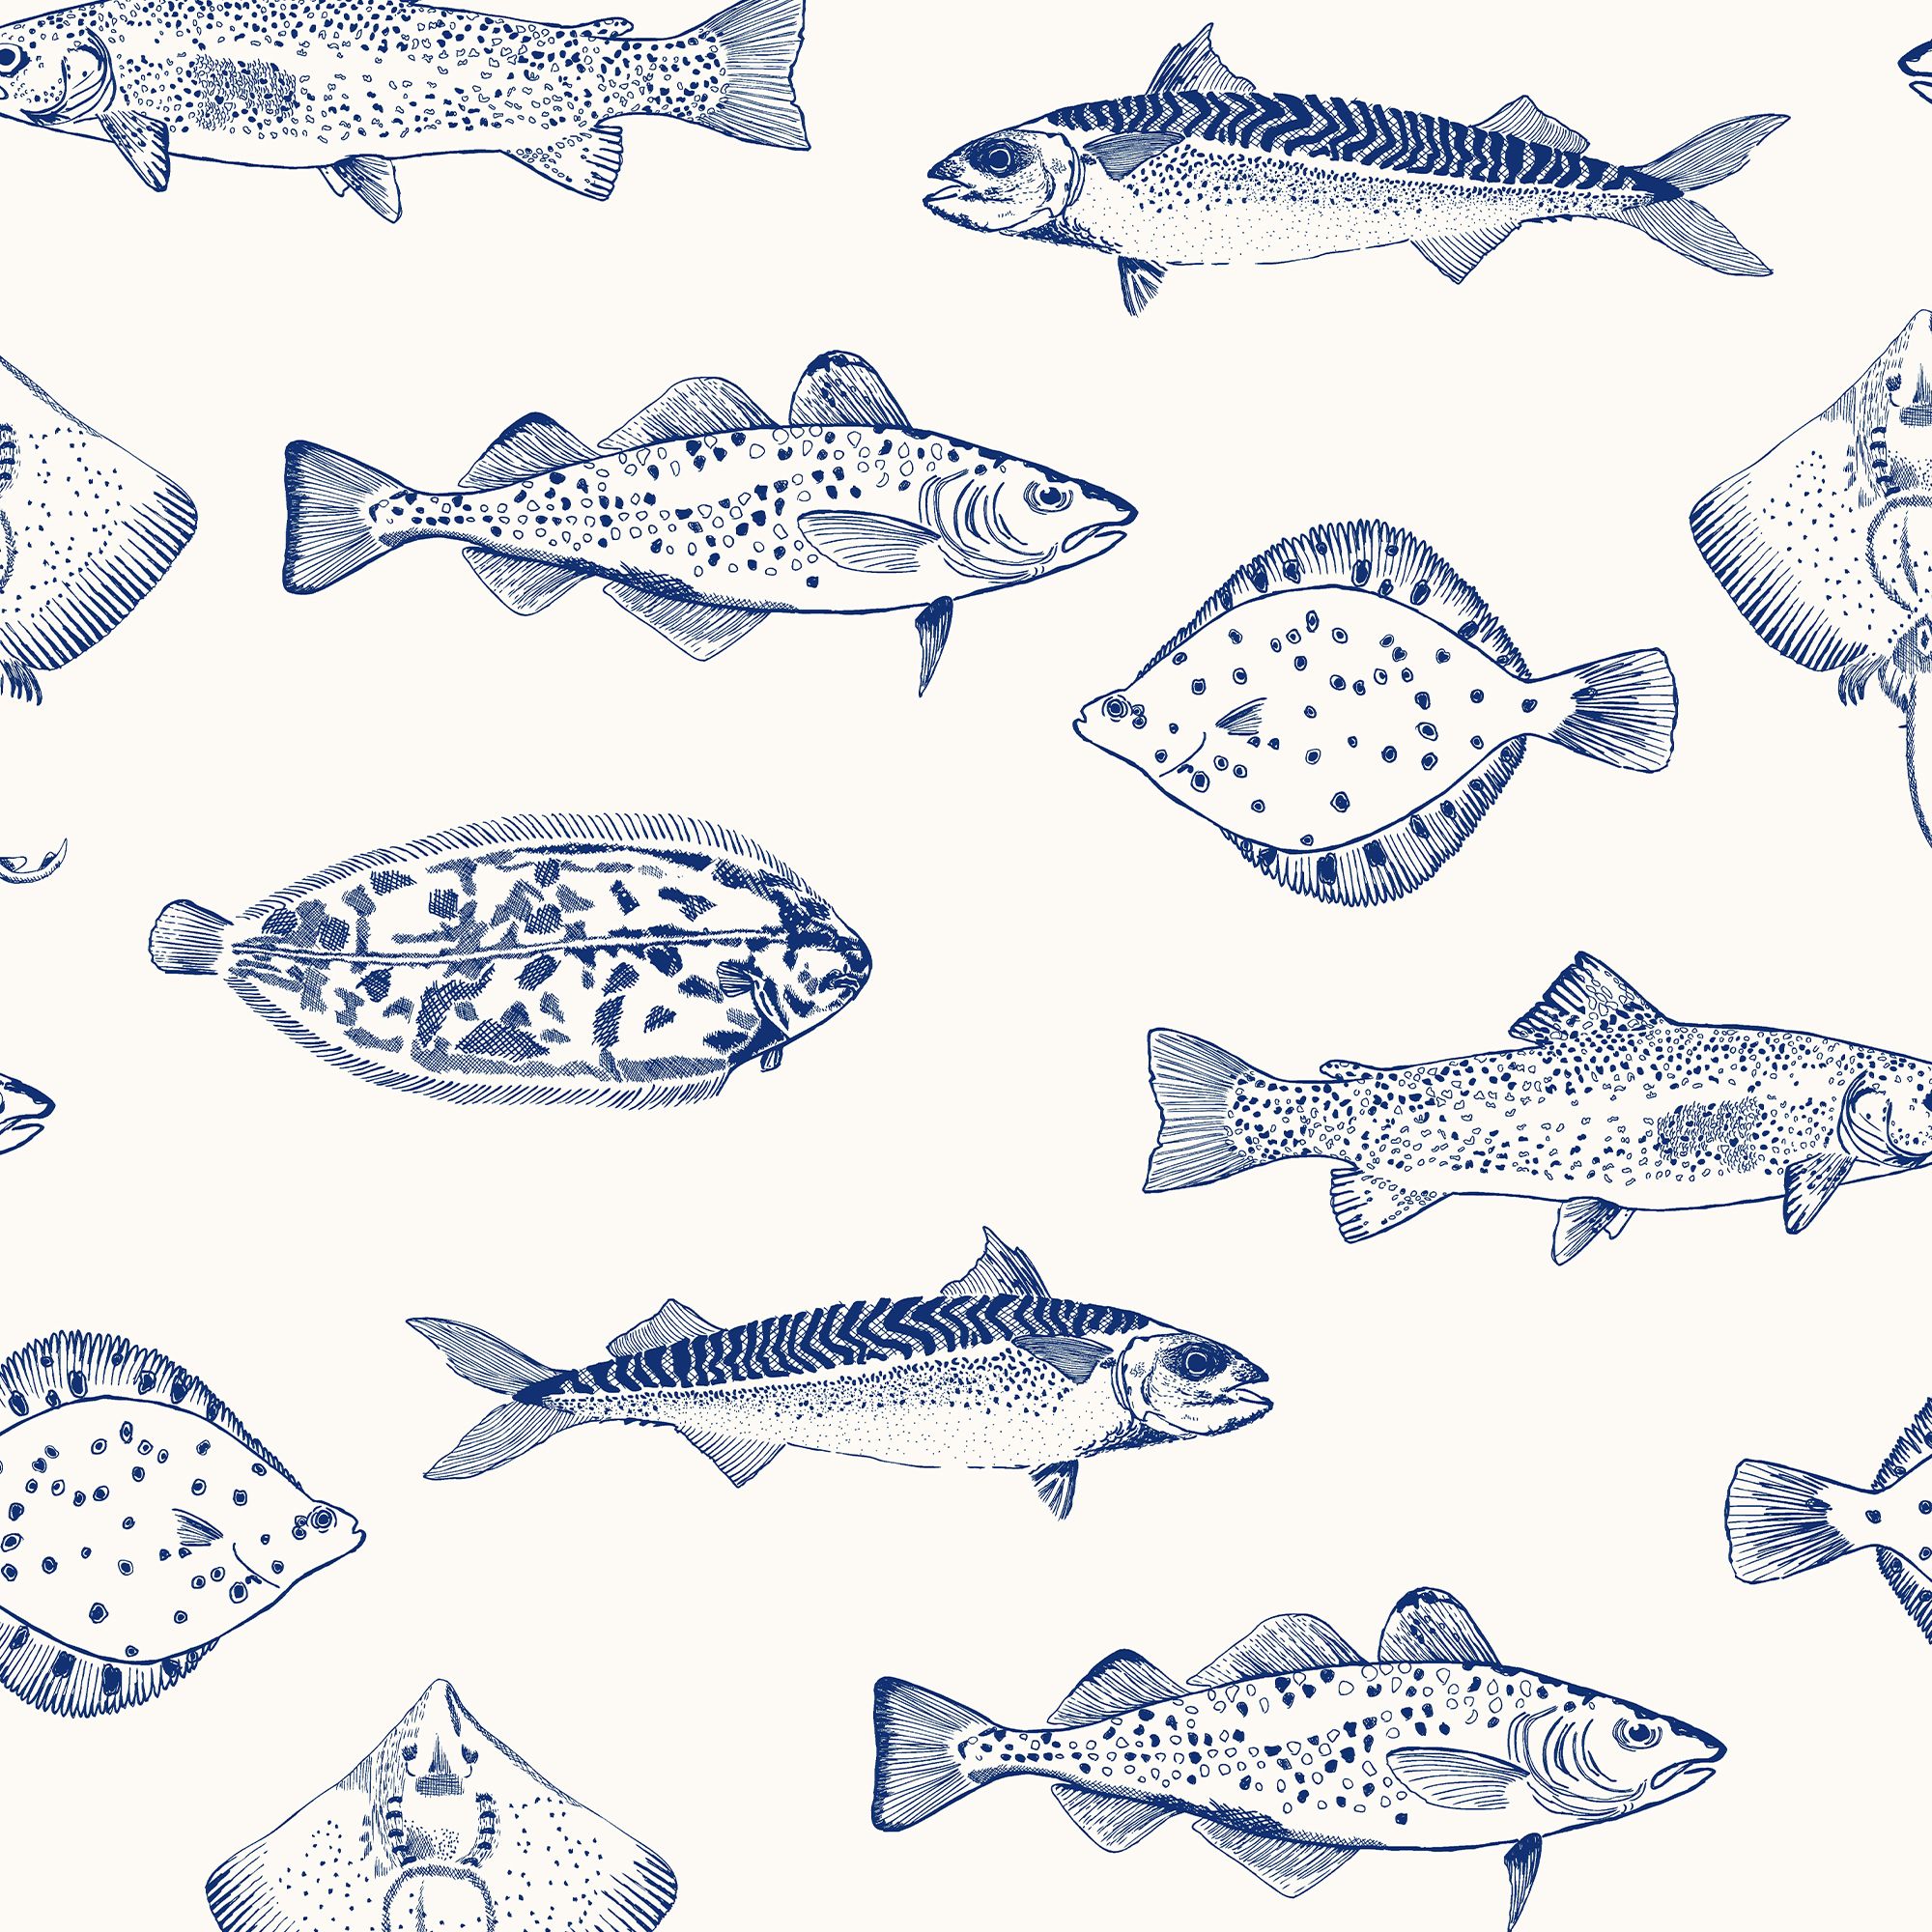 Joules Blue Fish Smooth Wallpaper Sample